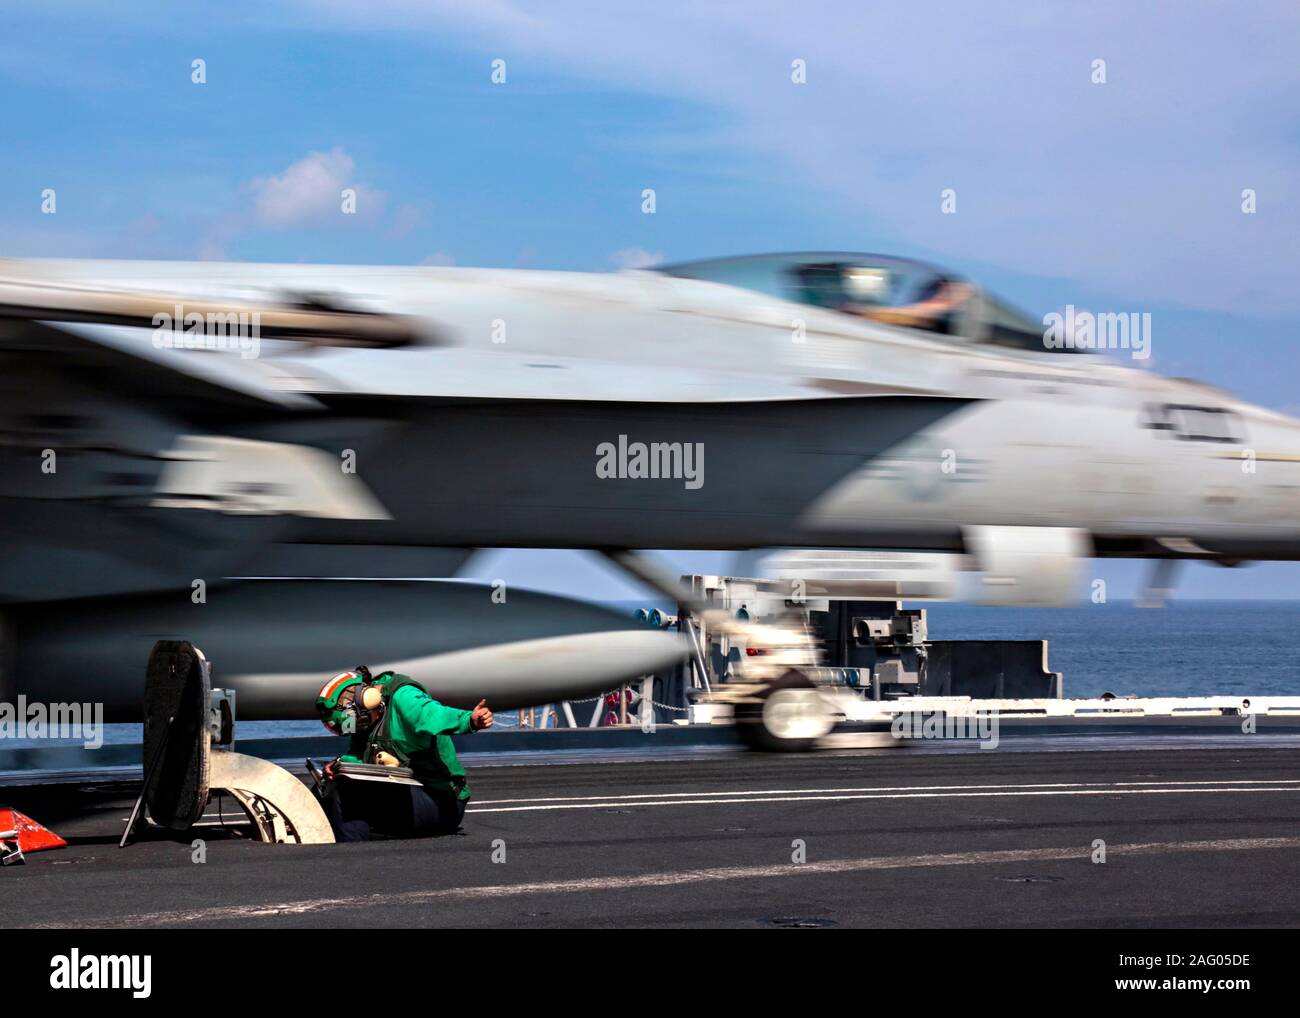 U.S. Navy sailor Jessie Rose gives a thumbs up as he launches a Navy F/A-18E Super Hornet fighter aircraft from the flight deck of the Nimitz-class aircraft carrier USS Abraham Lincoln in support of Operation Inherent Resolve December 13, 2019 in the Arabian Gulf. Stock Photo